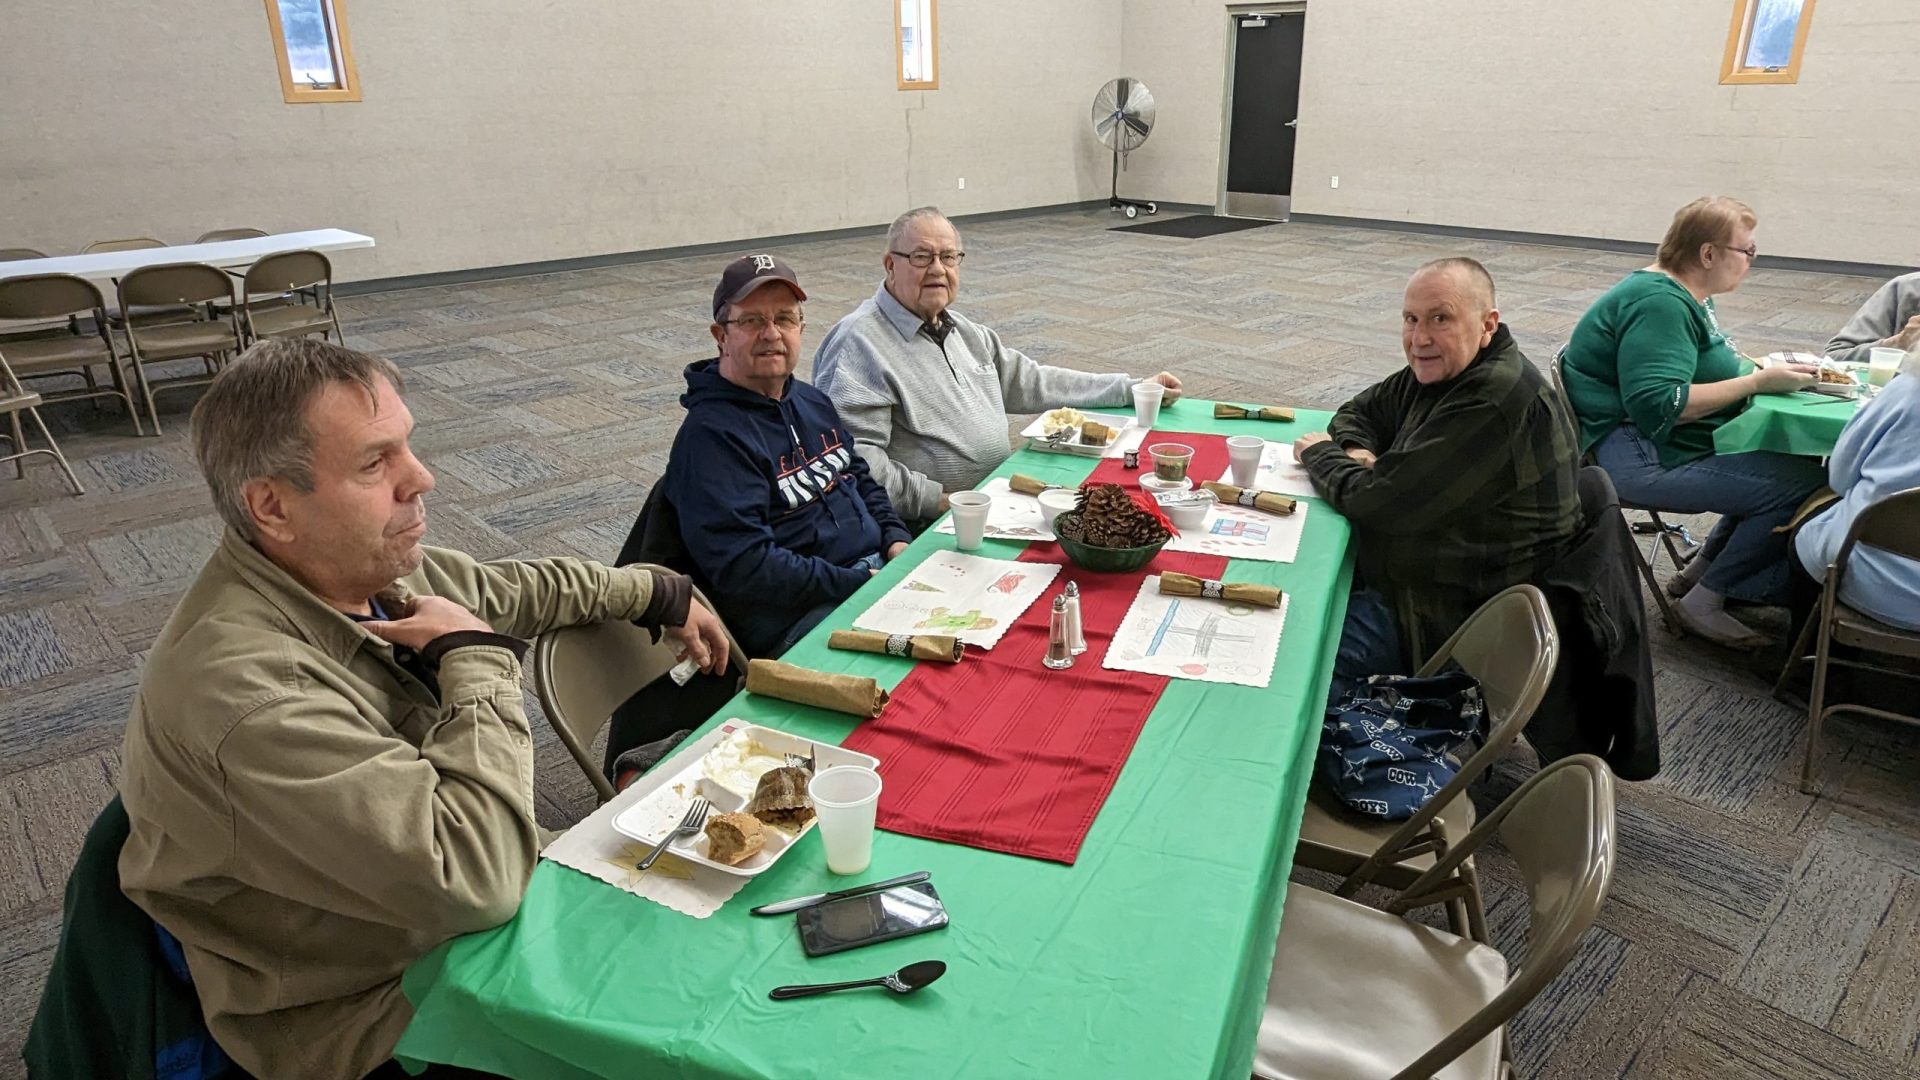 DTE Holiday Meal 2022 at Holton